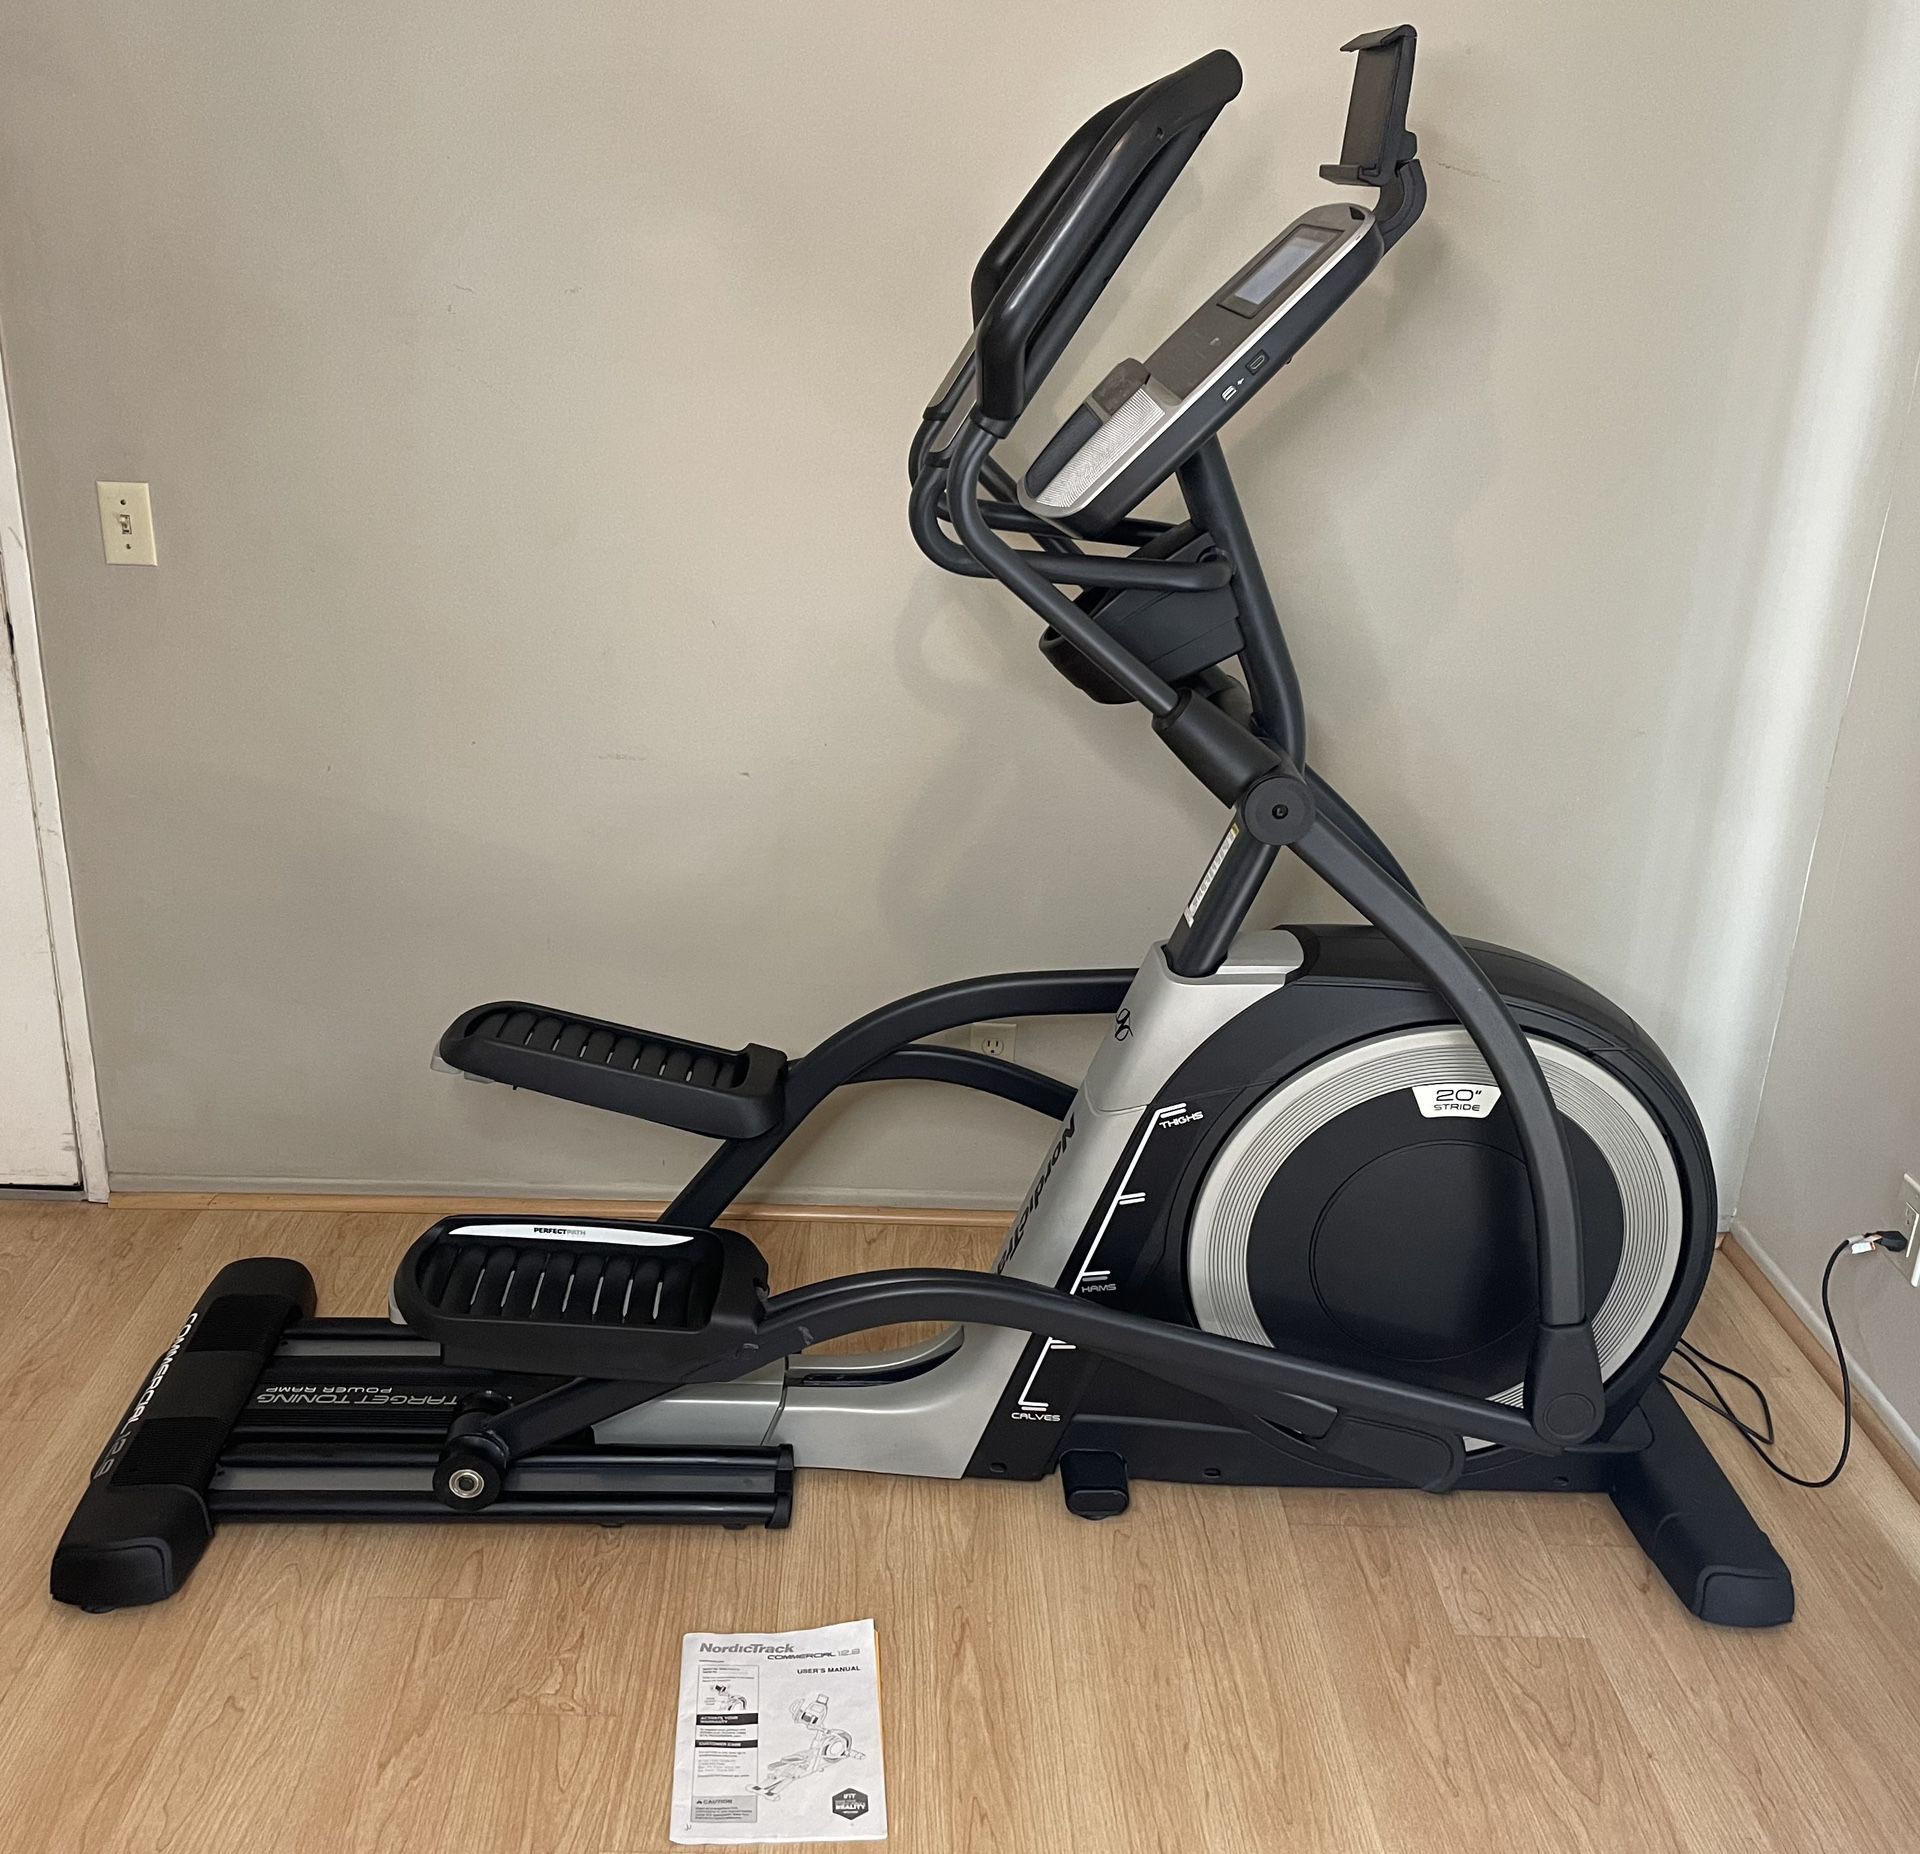 NordicTrack Commercial 12.9 Elliptical Stride-Trainer Exercise Workout Machine Fitness Cardio